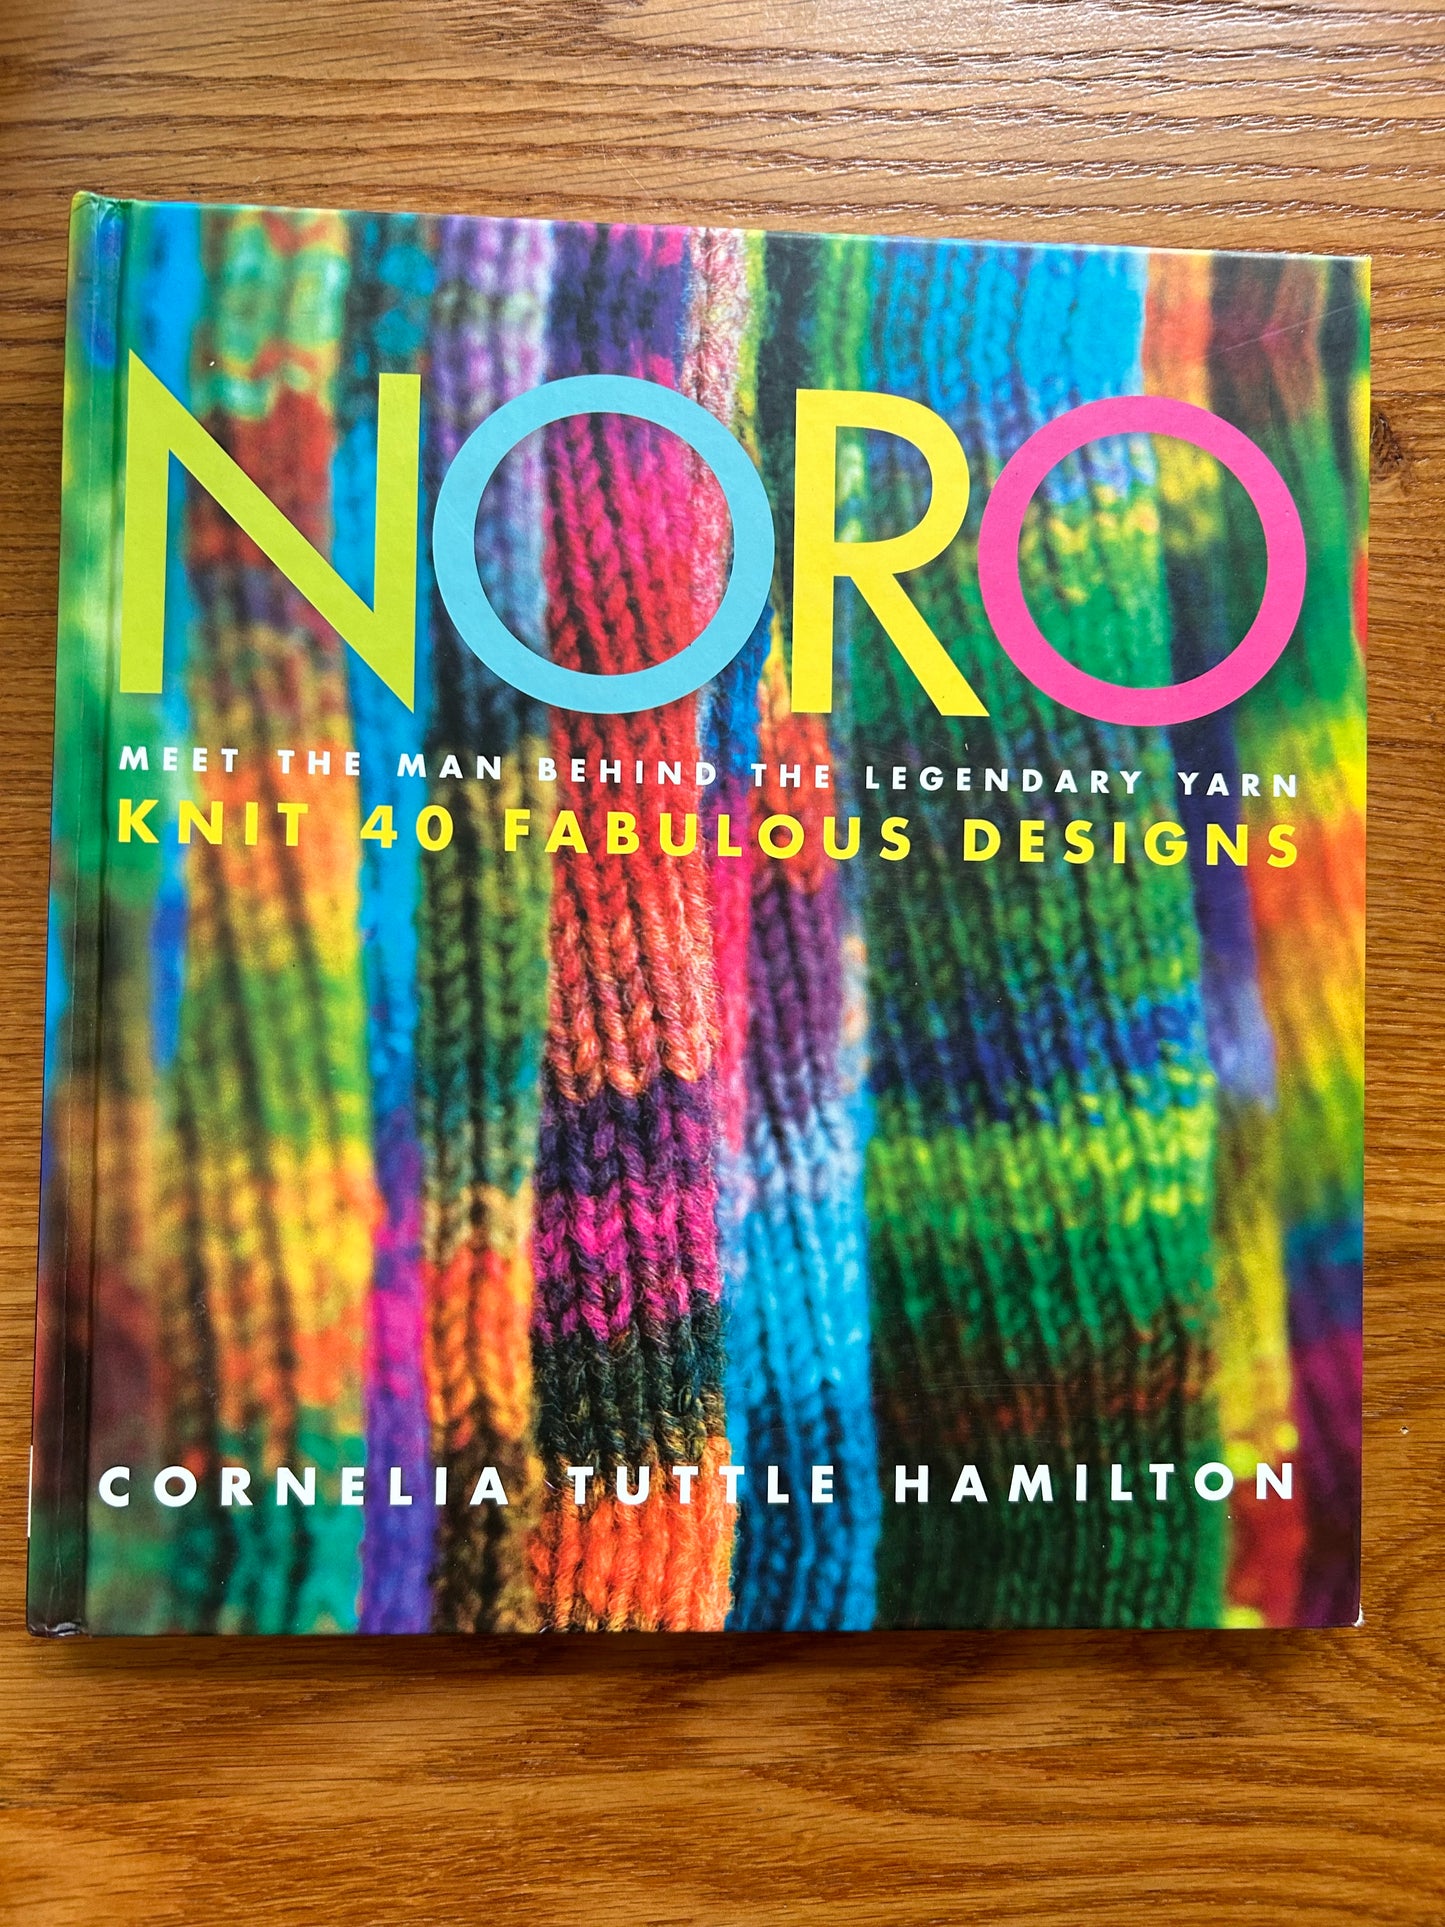 Noro: Meet the Man Behind the Legendary Yarn - Knit 40 Fabulous Designs